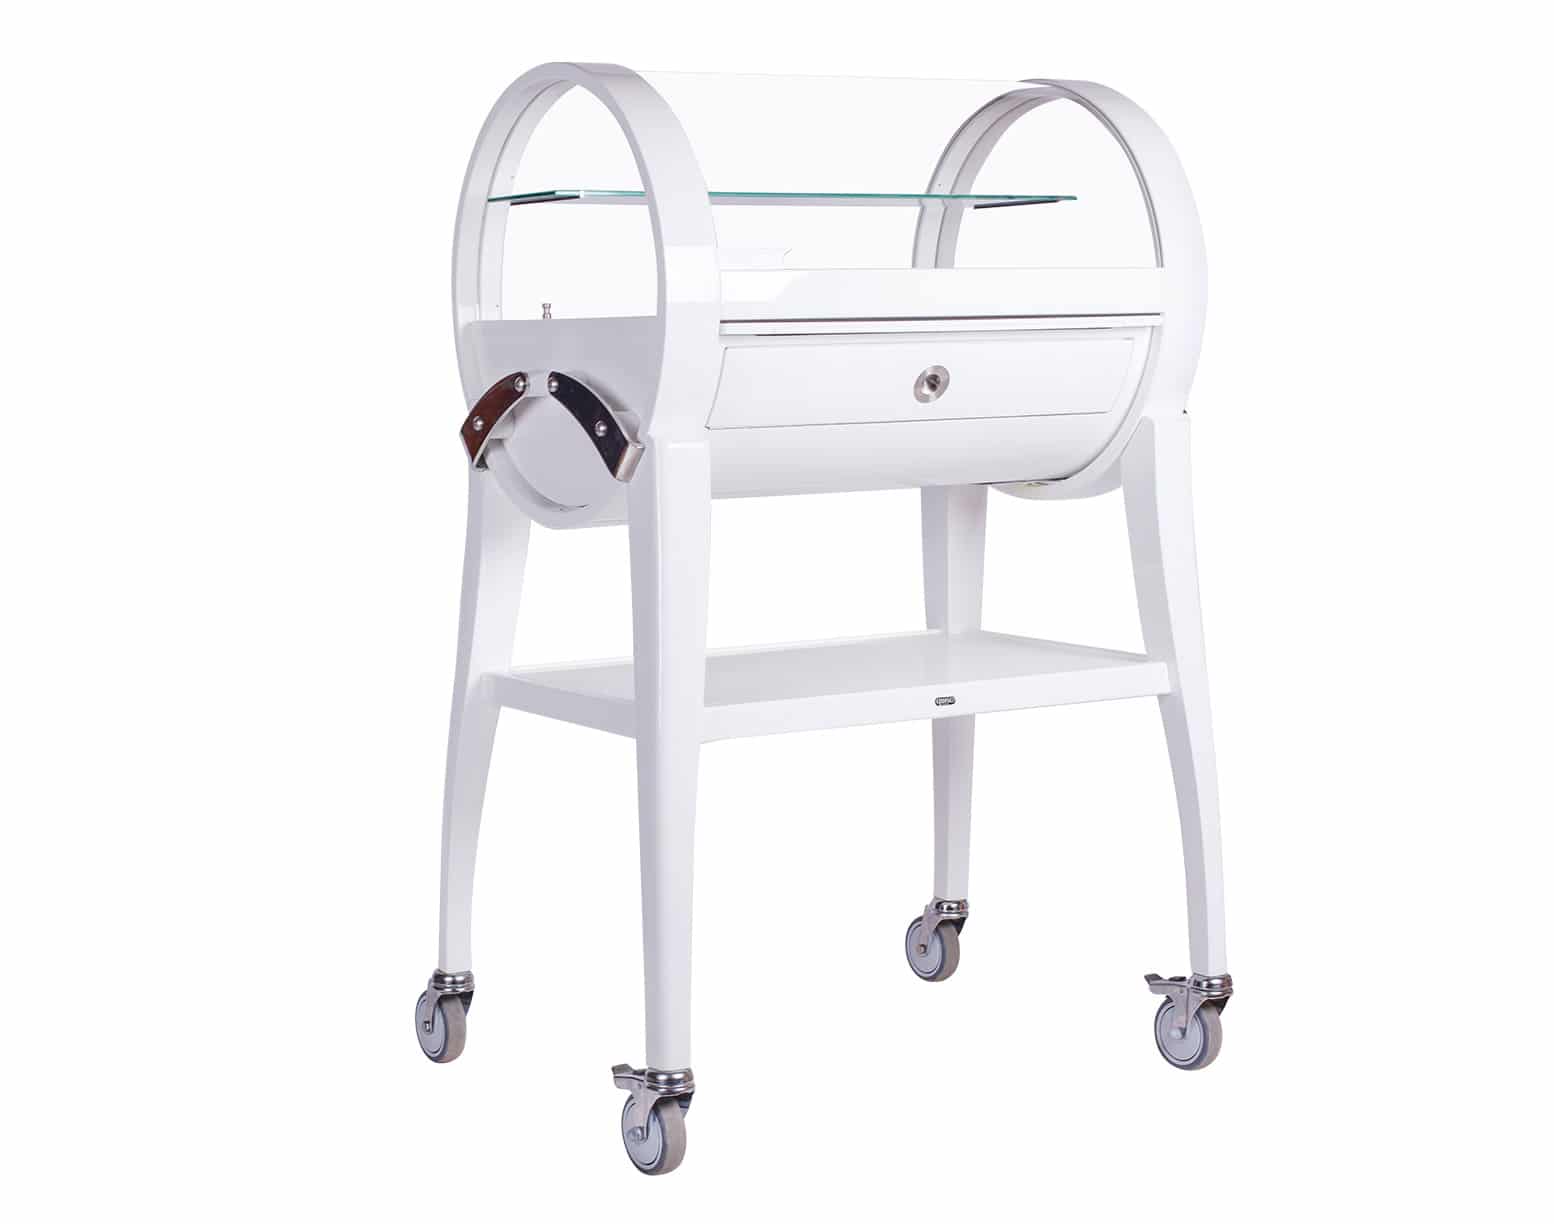 QUISO white lacquer SWEET KIT dessert trolley